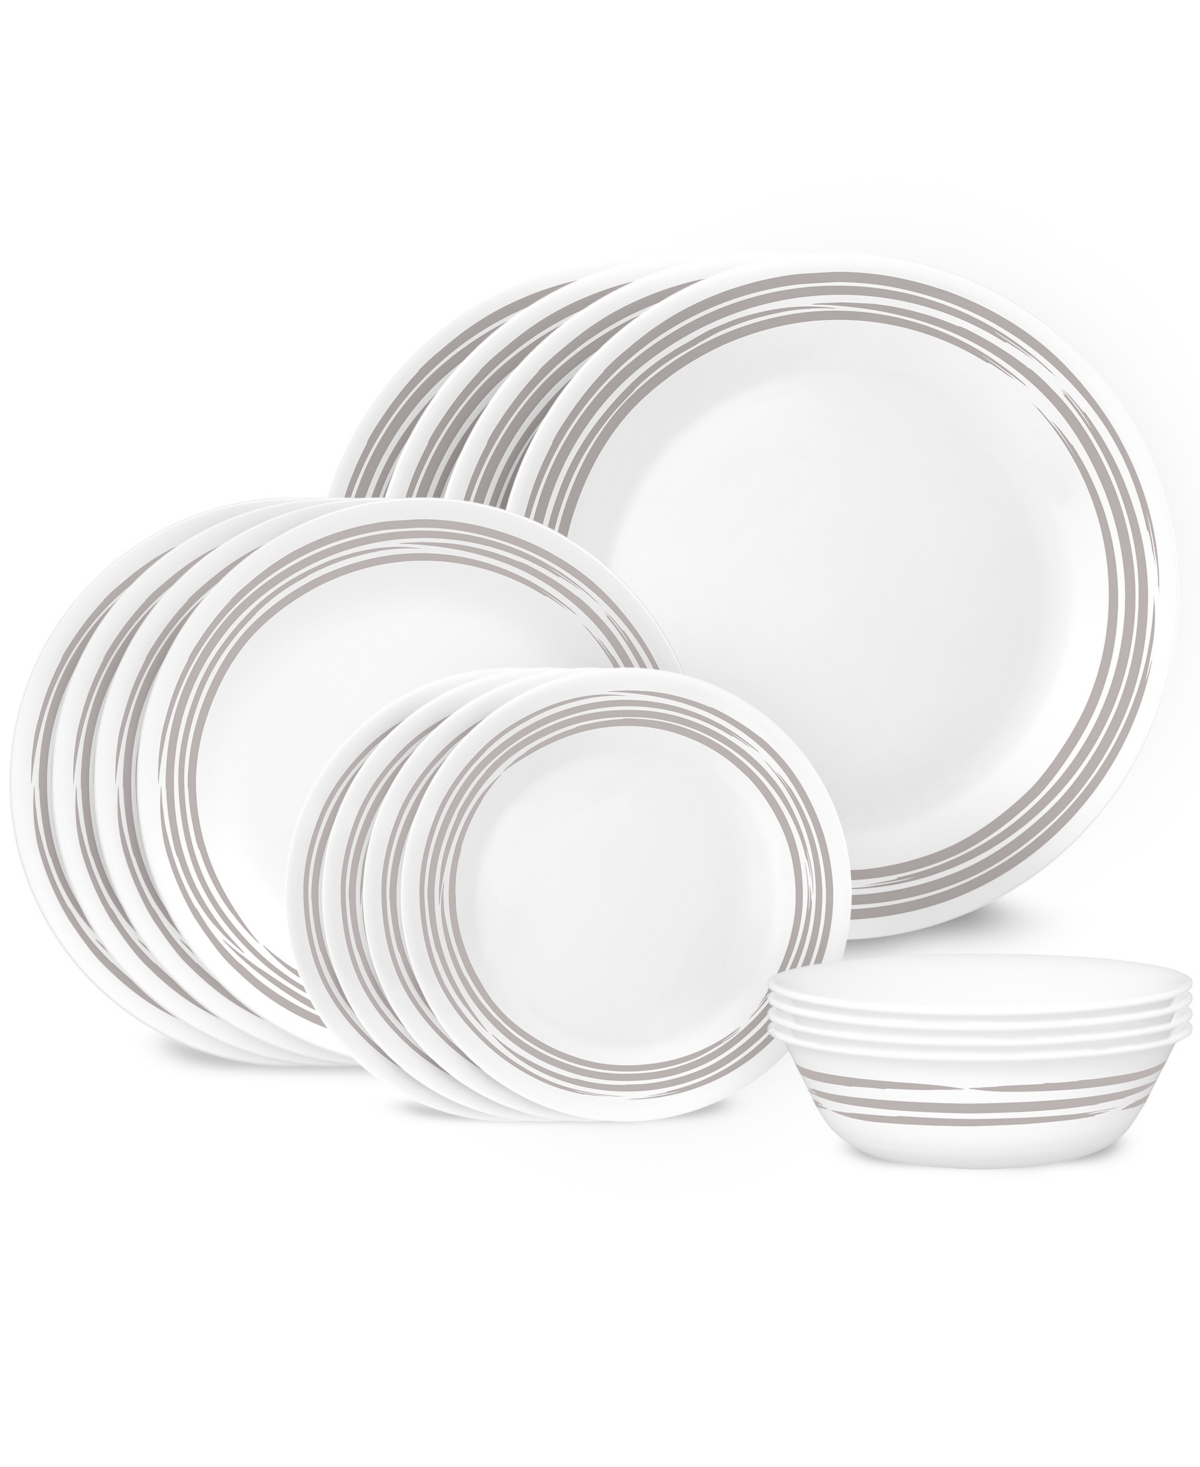 Brushed Dinnerware Set, 16 Pieces - White, Silvery-Gray